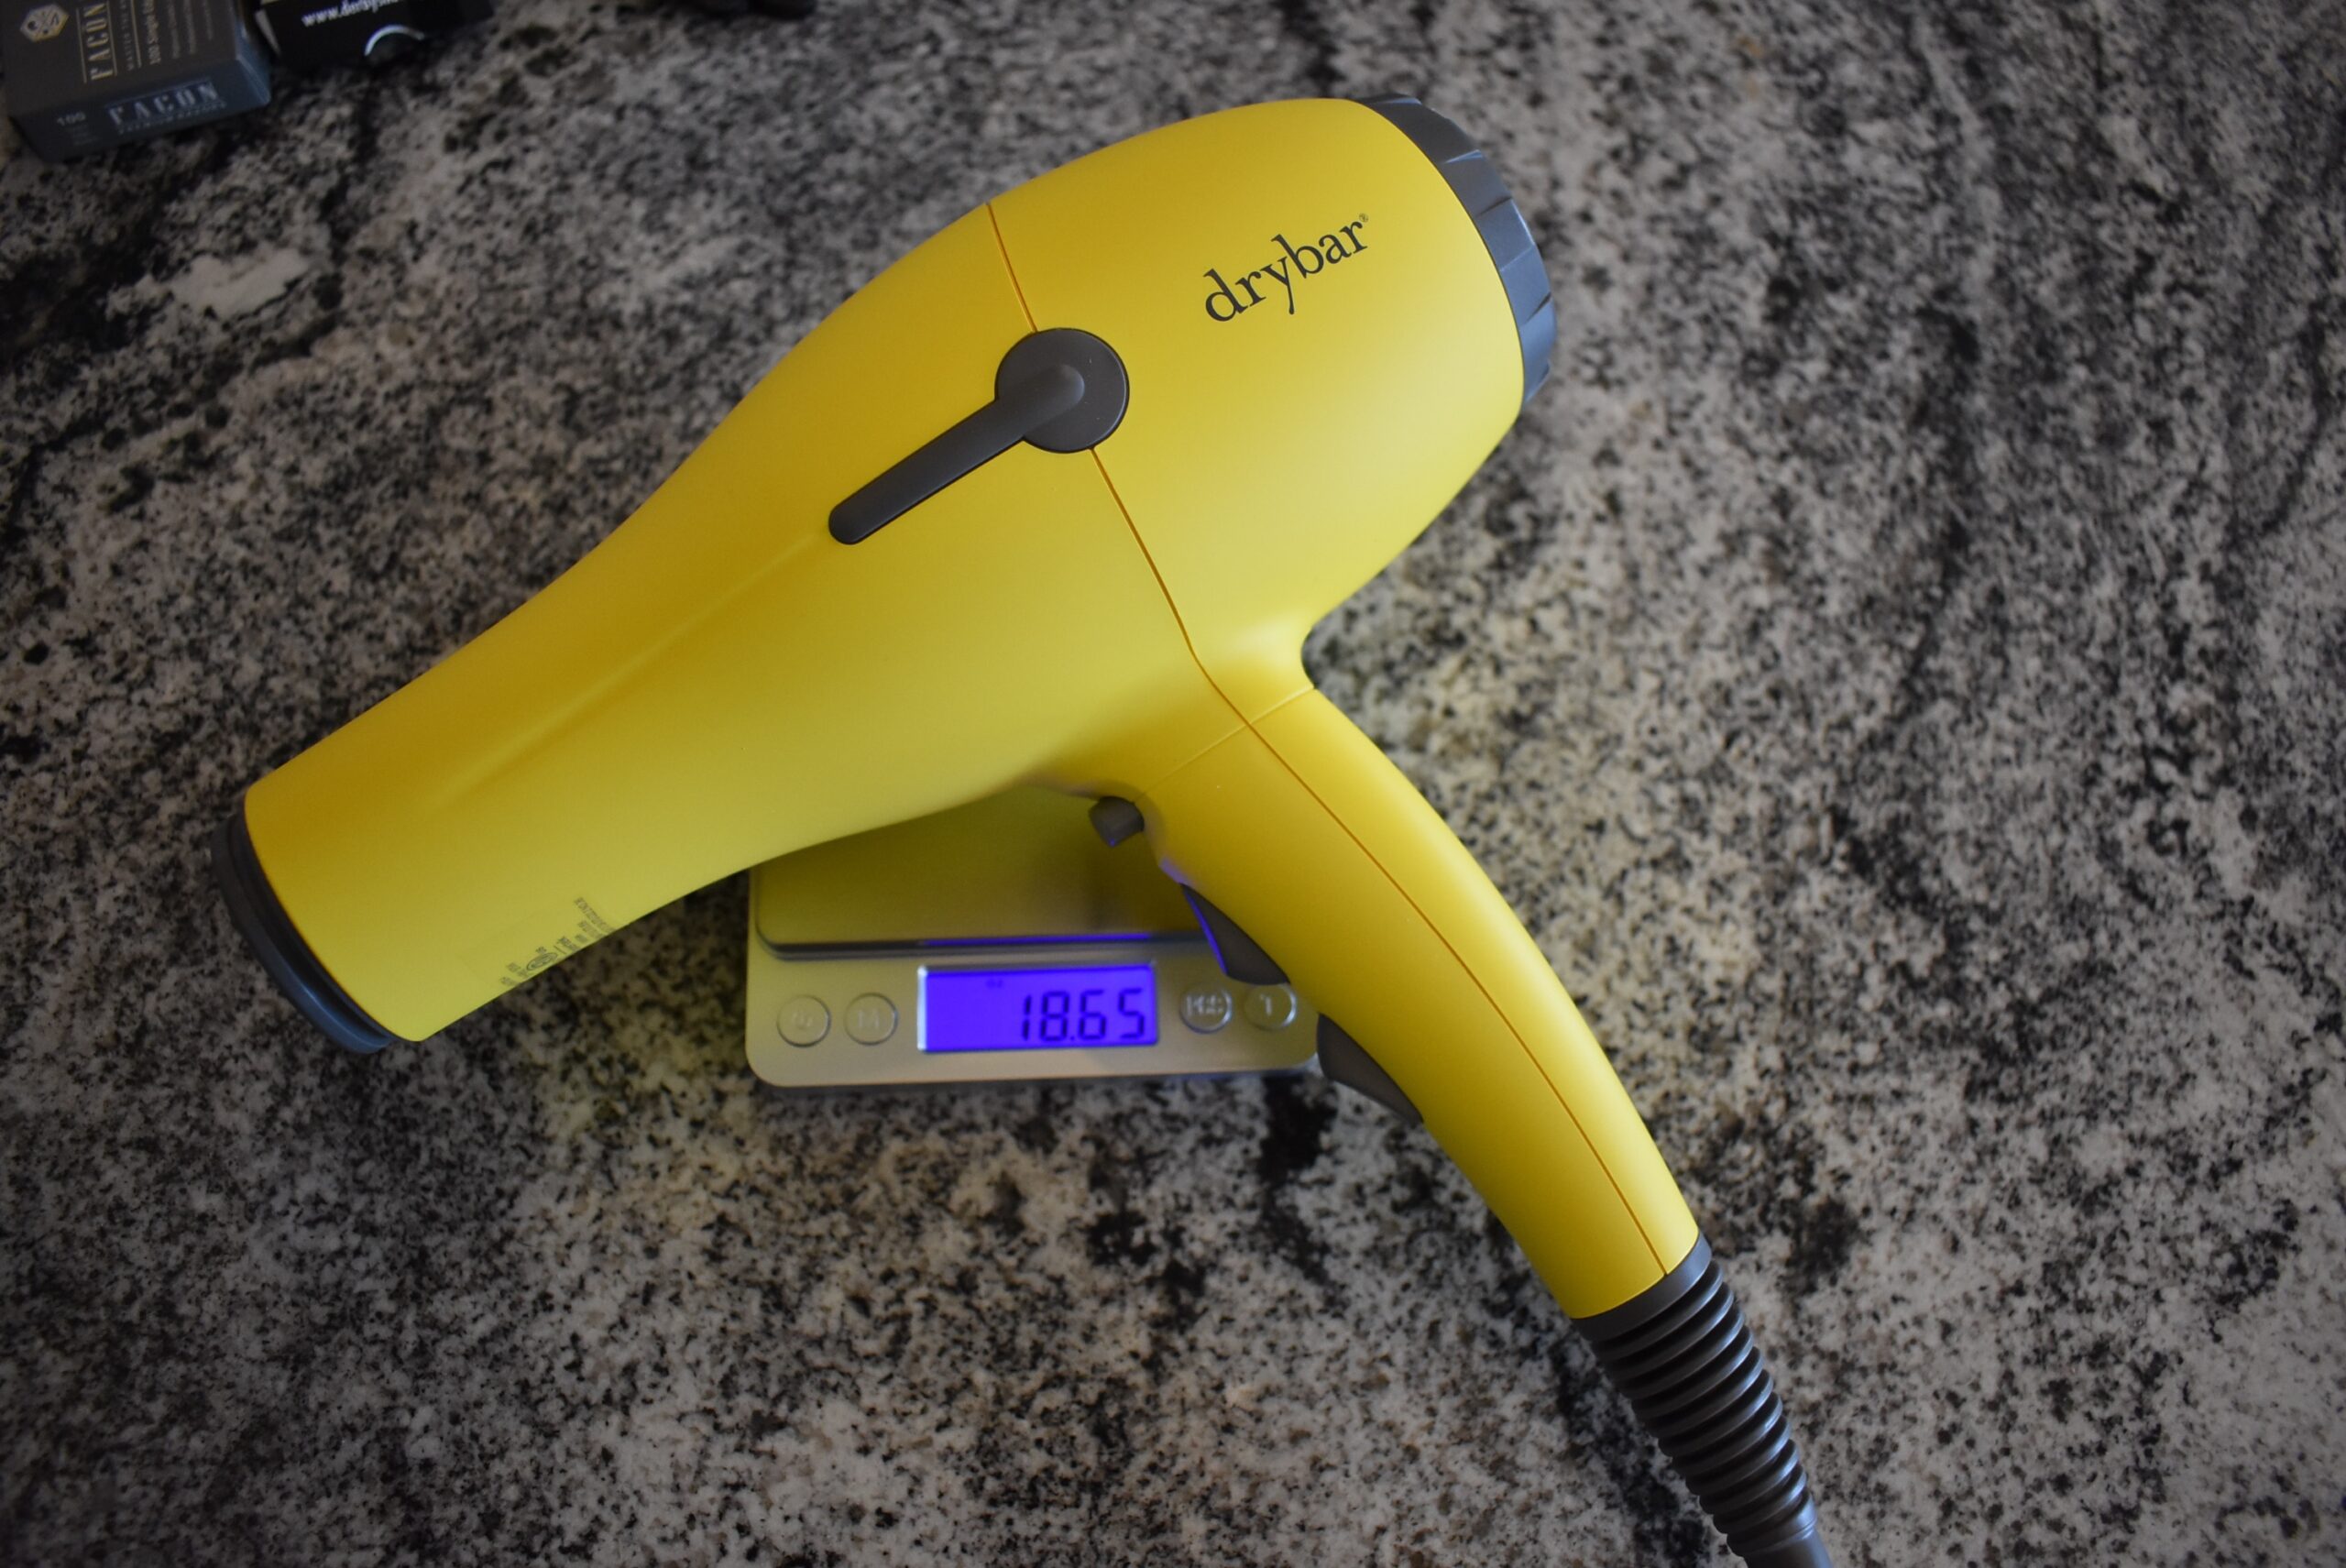 The Drybar Buttercup, one of the top hair dryers, on an oz kitchen scale